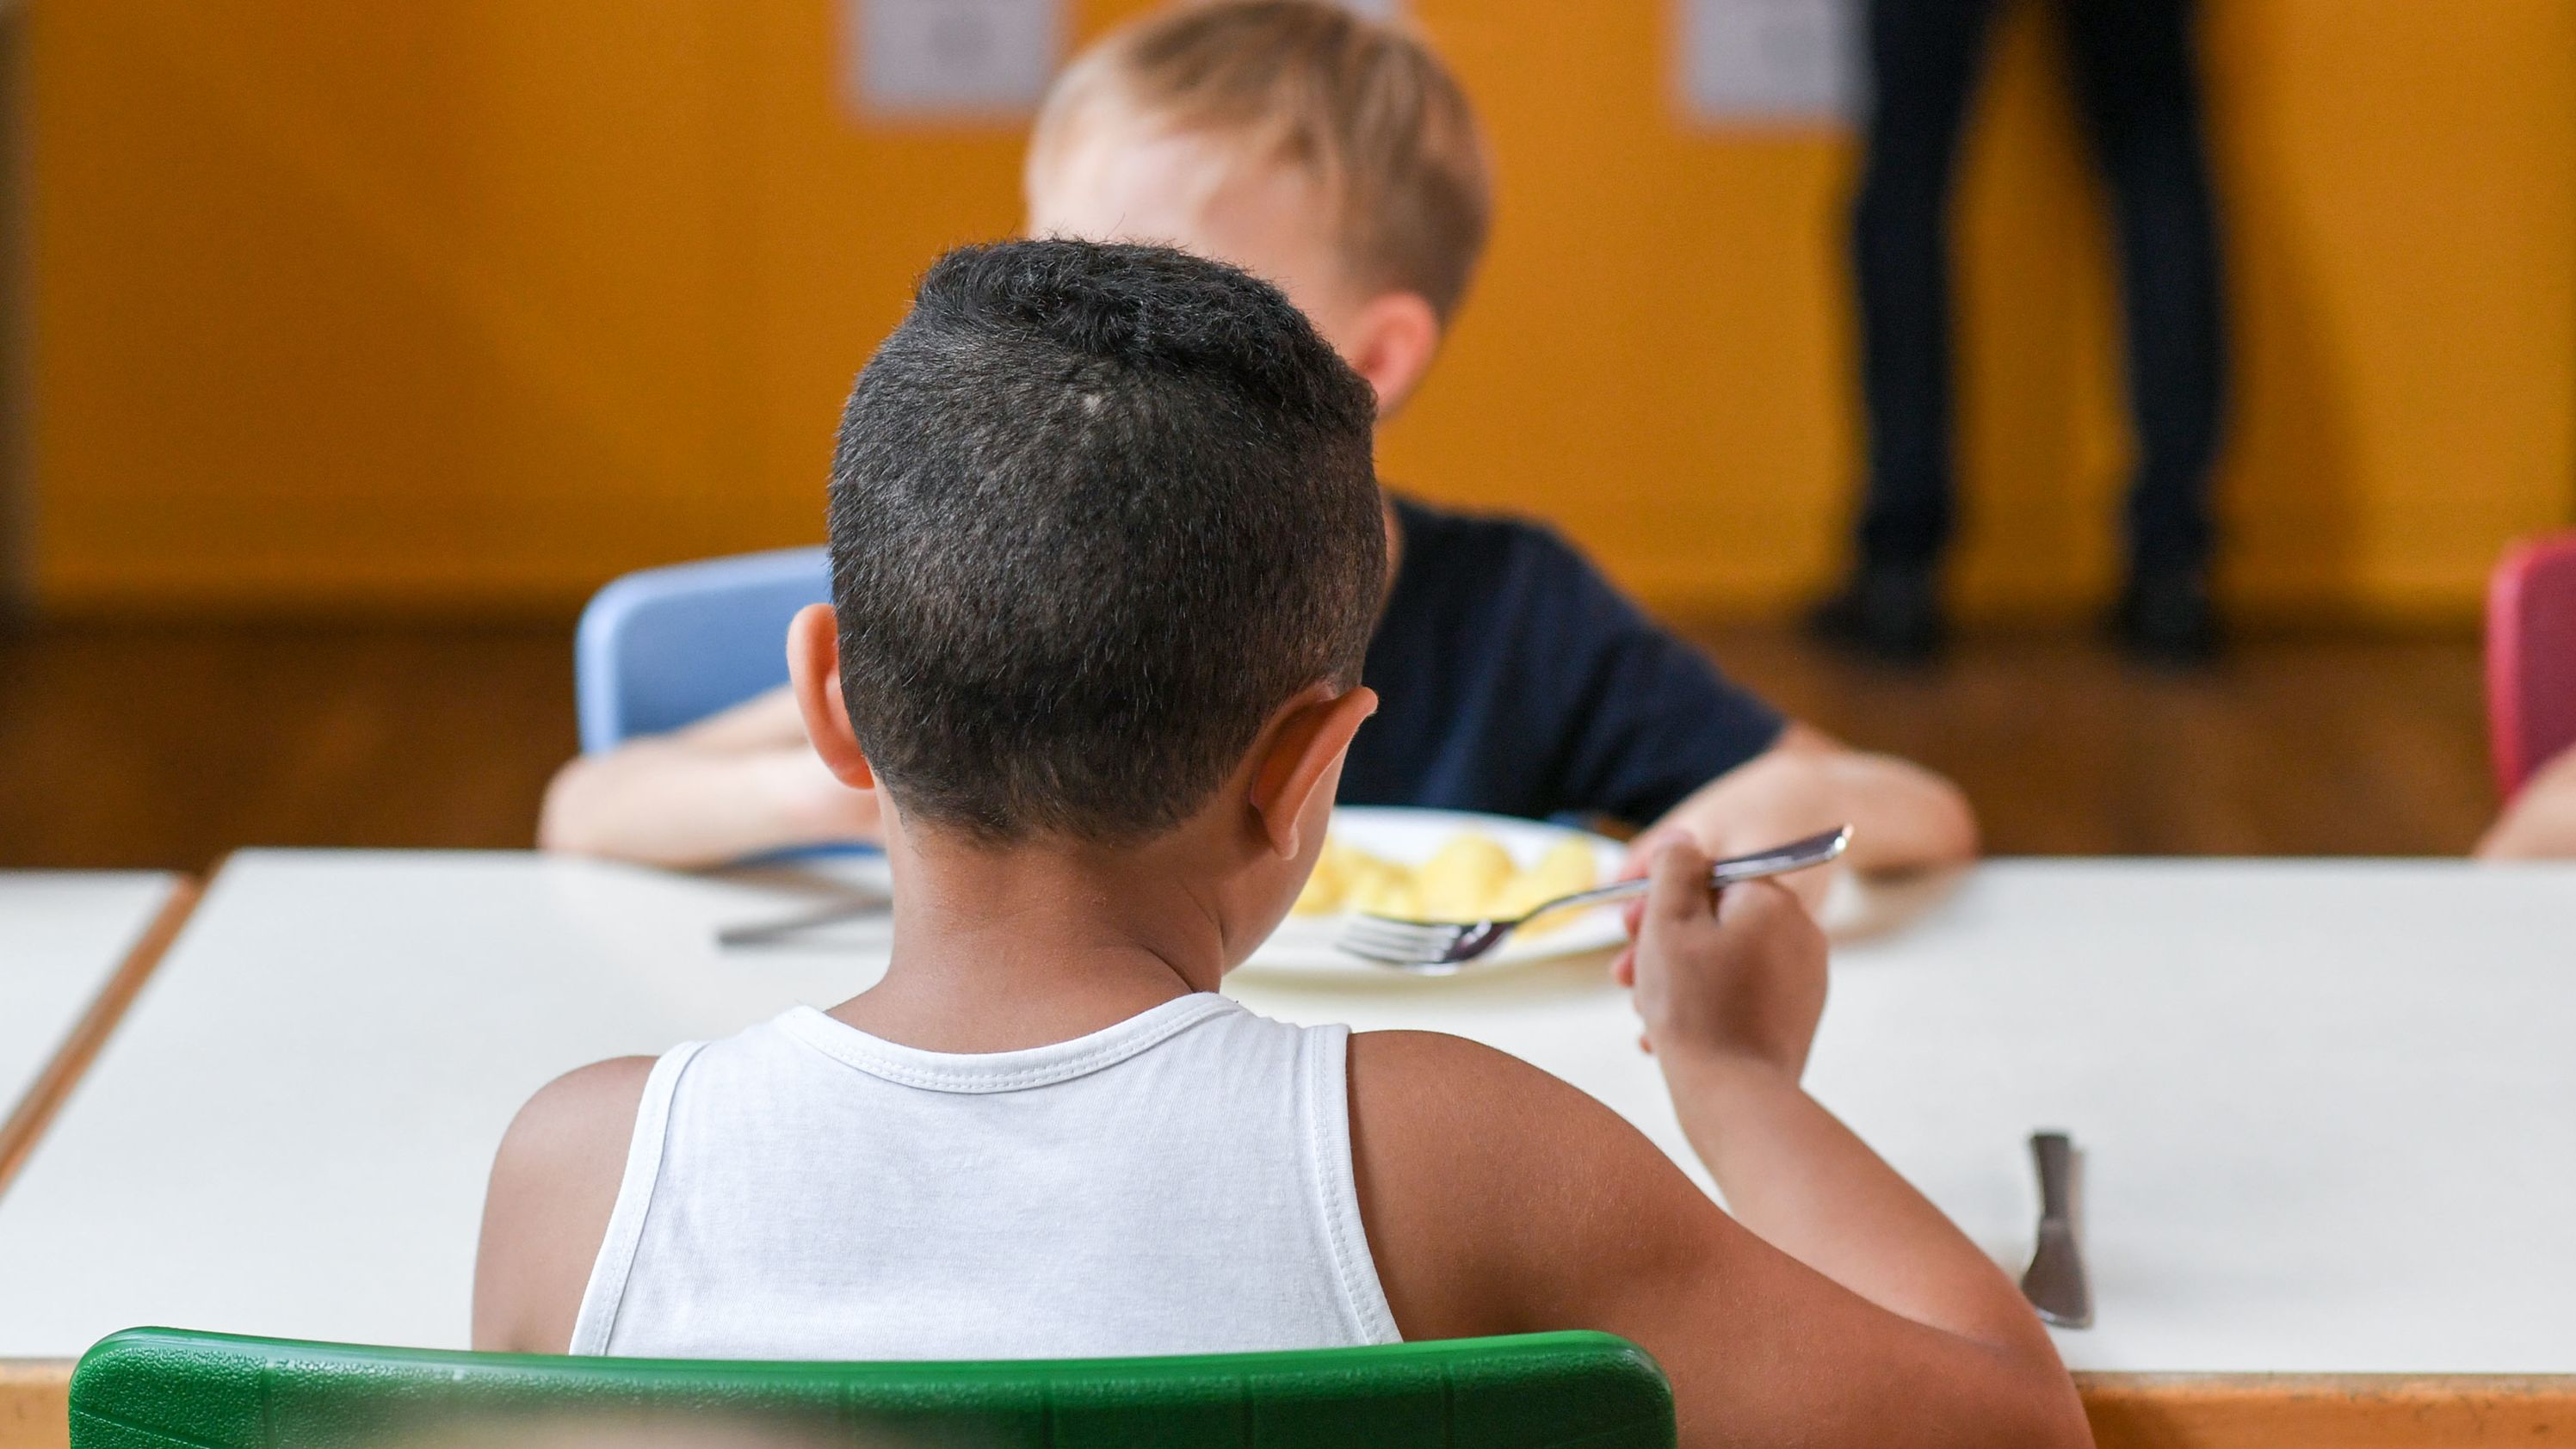 School lunches are a a reliable source for food for homeless students.